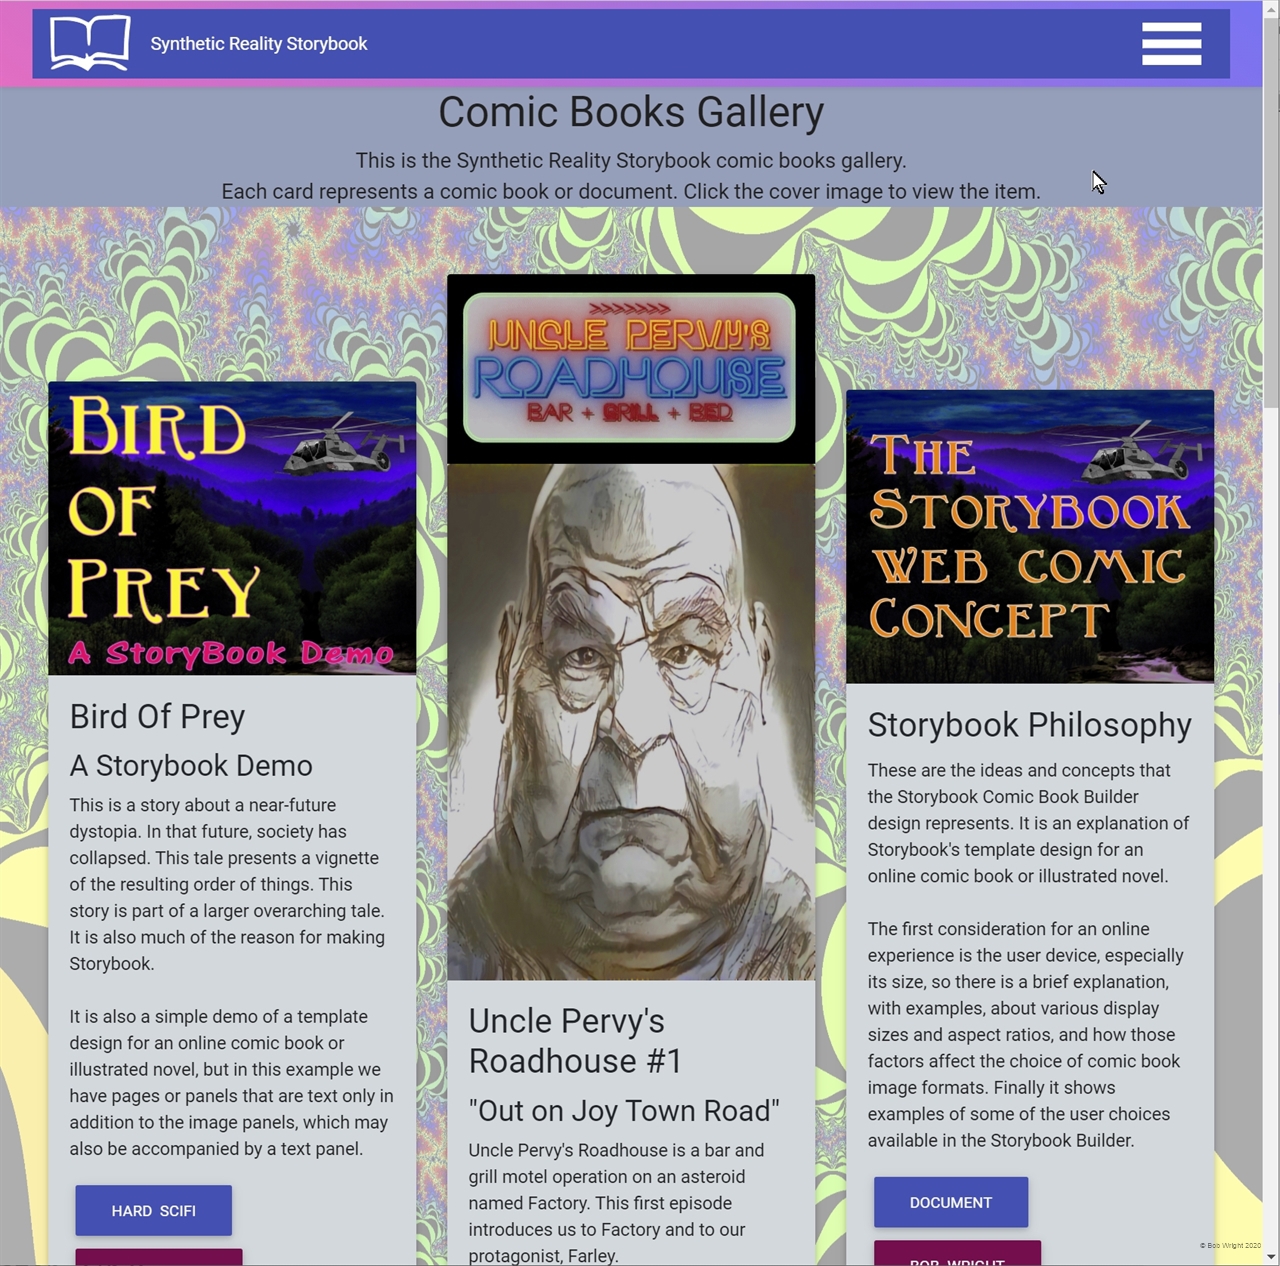 Screen capture of the Storybook Comics gallery